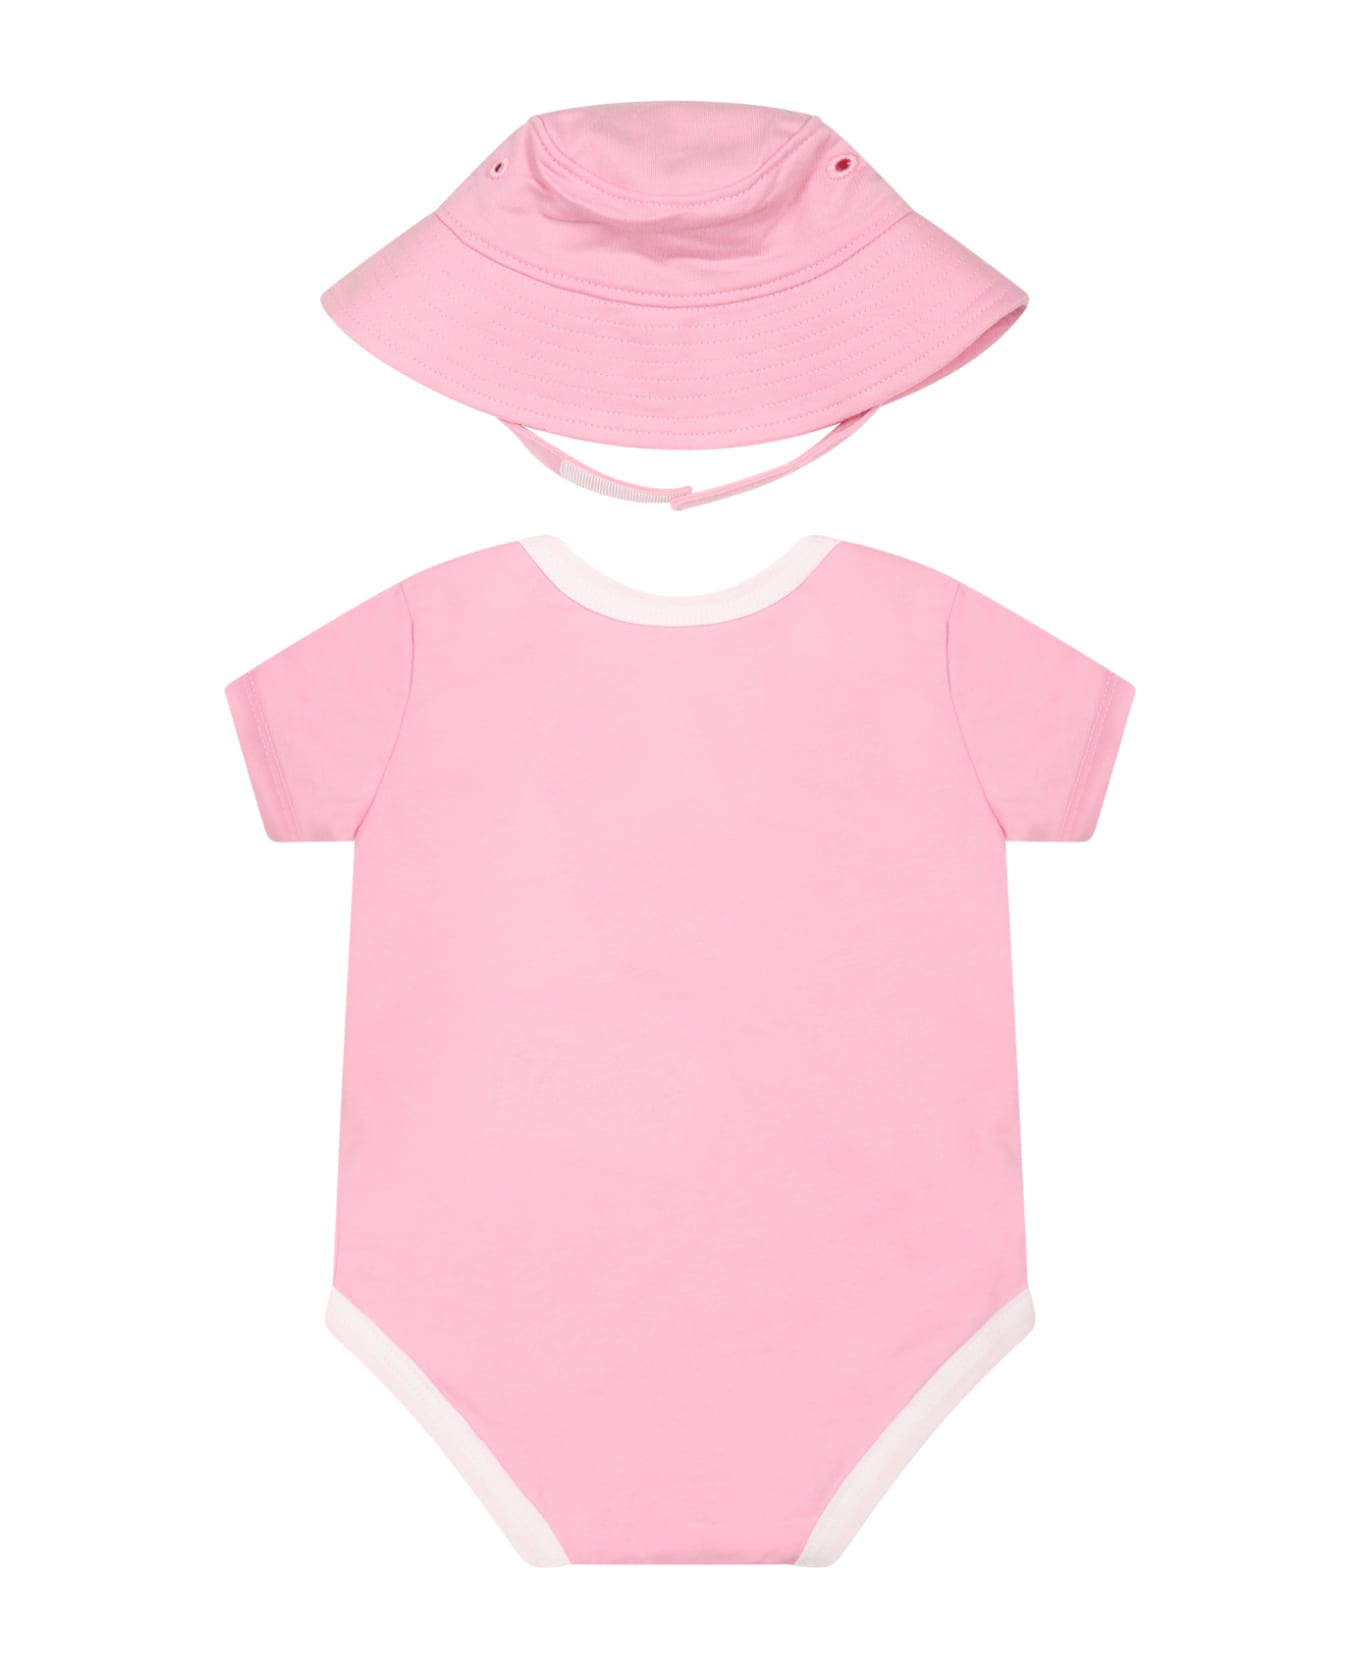 Nike Pink Set For Baby Girl With Iconic Swoosh - Pink ボディスーツ＆セットアップ